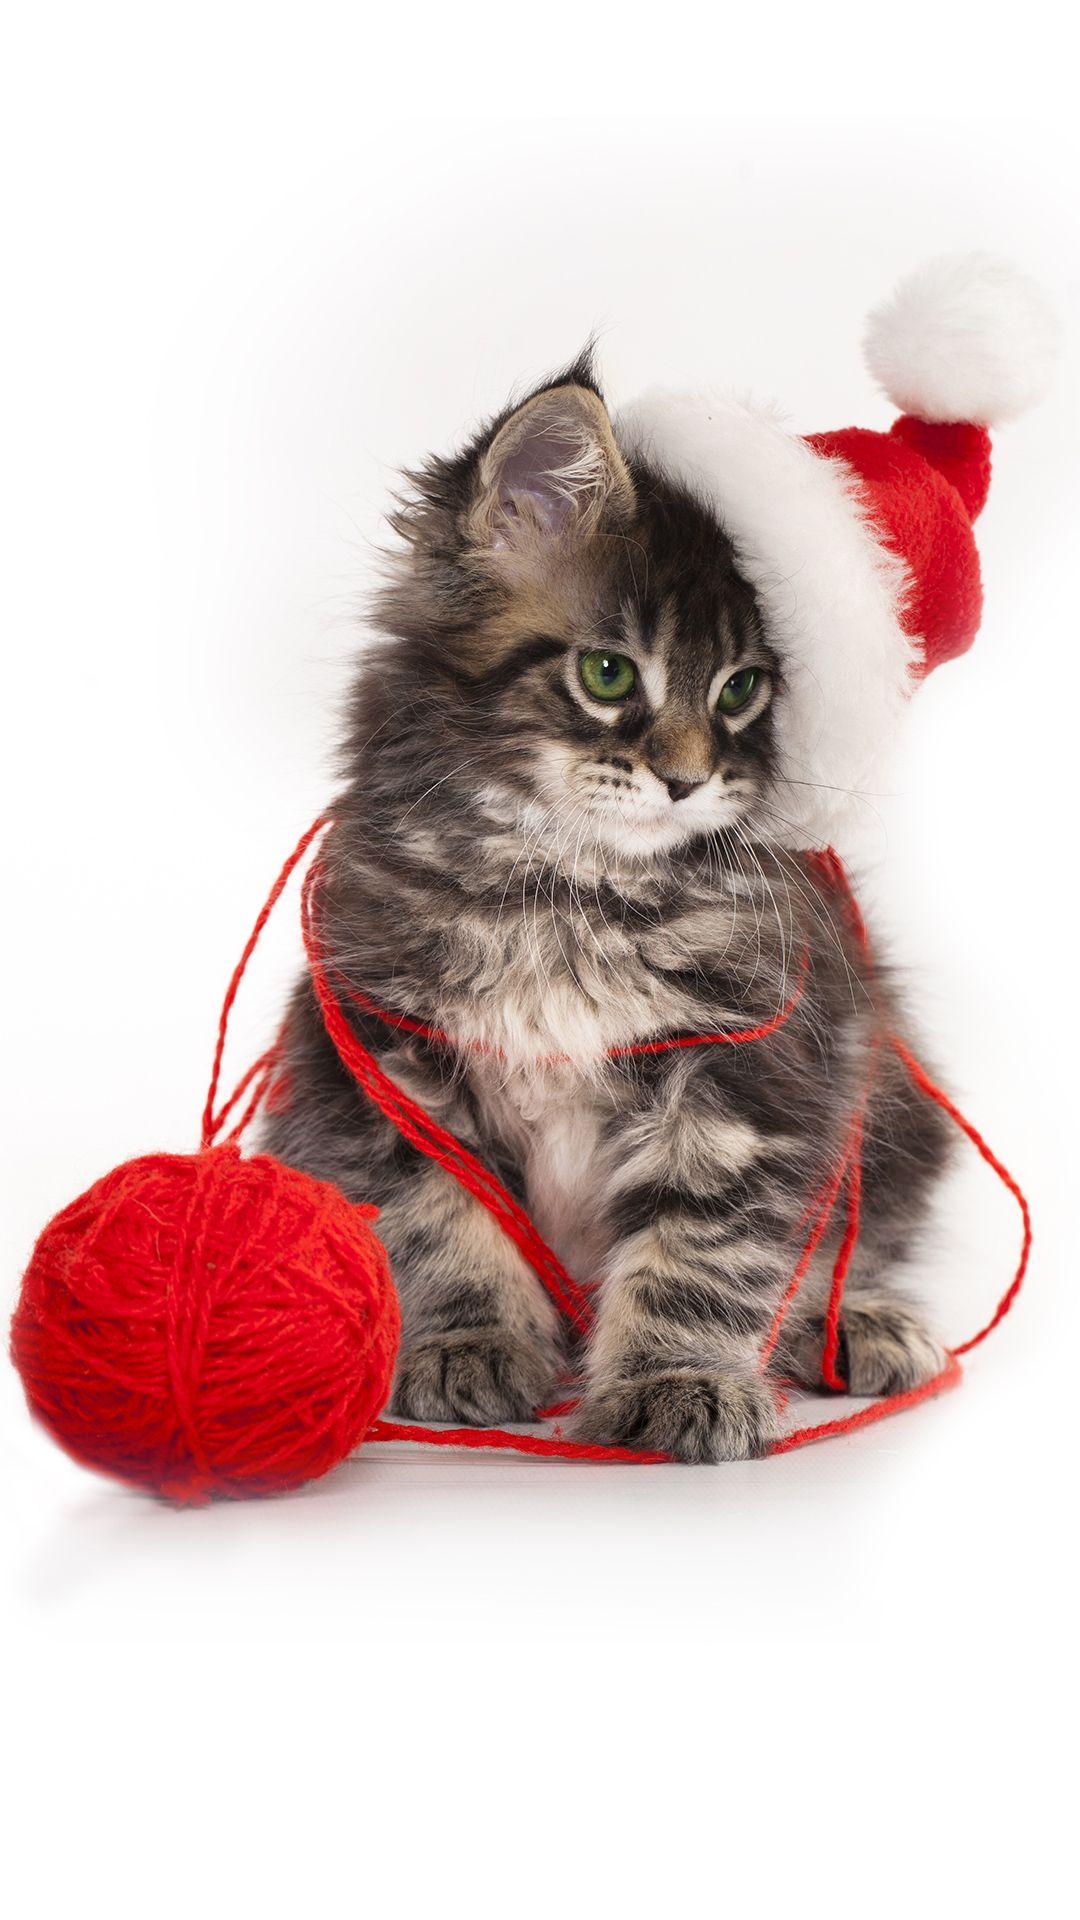 Christmas Kitten IPhone 6S Plus Wallpaper Quality Image And Transparent PNG Free Clipart